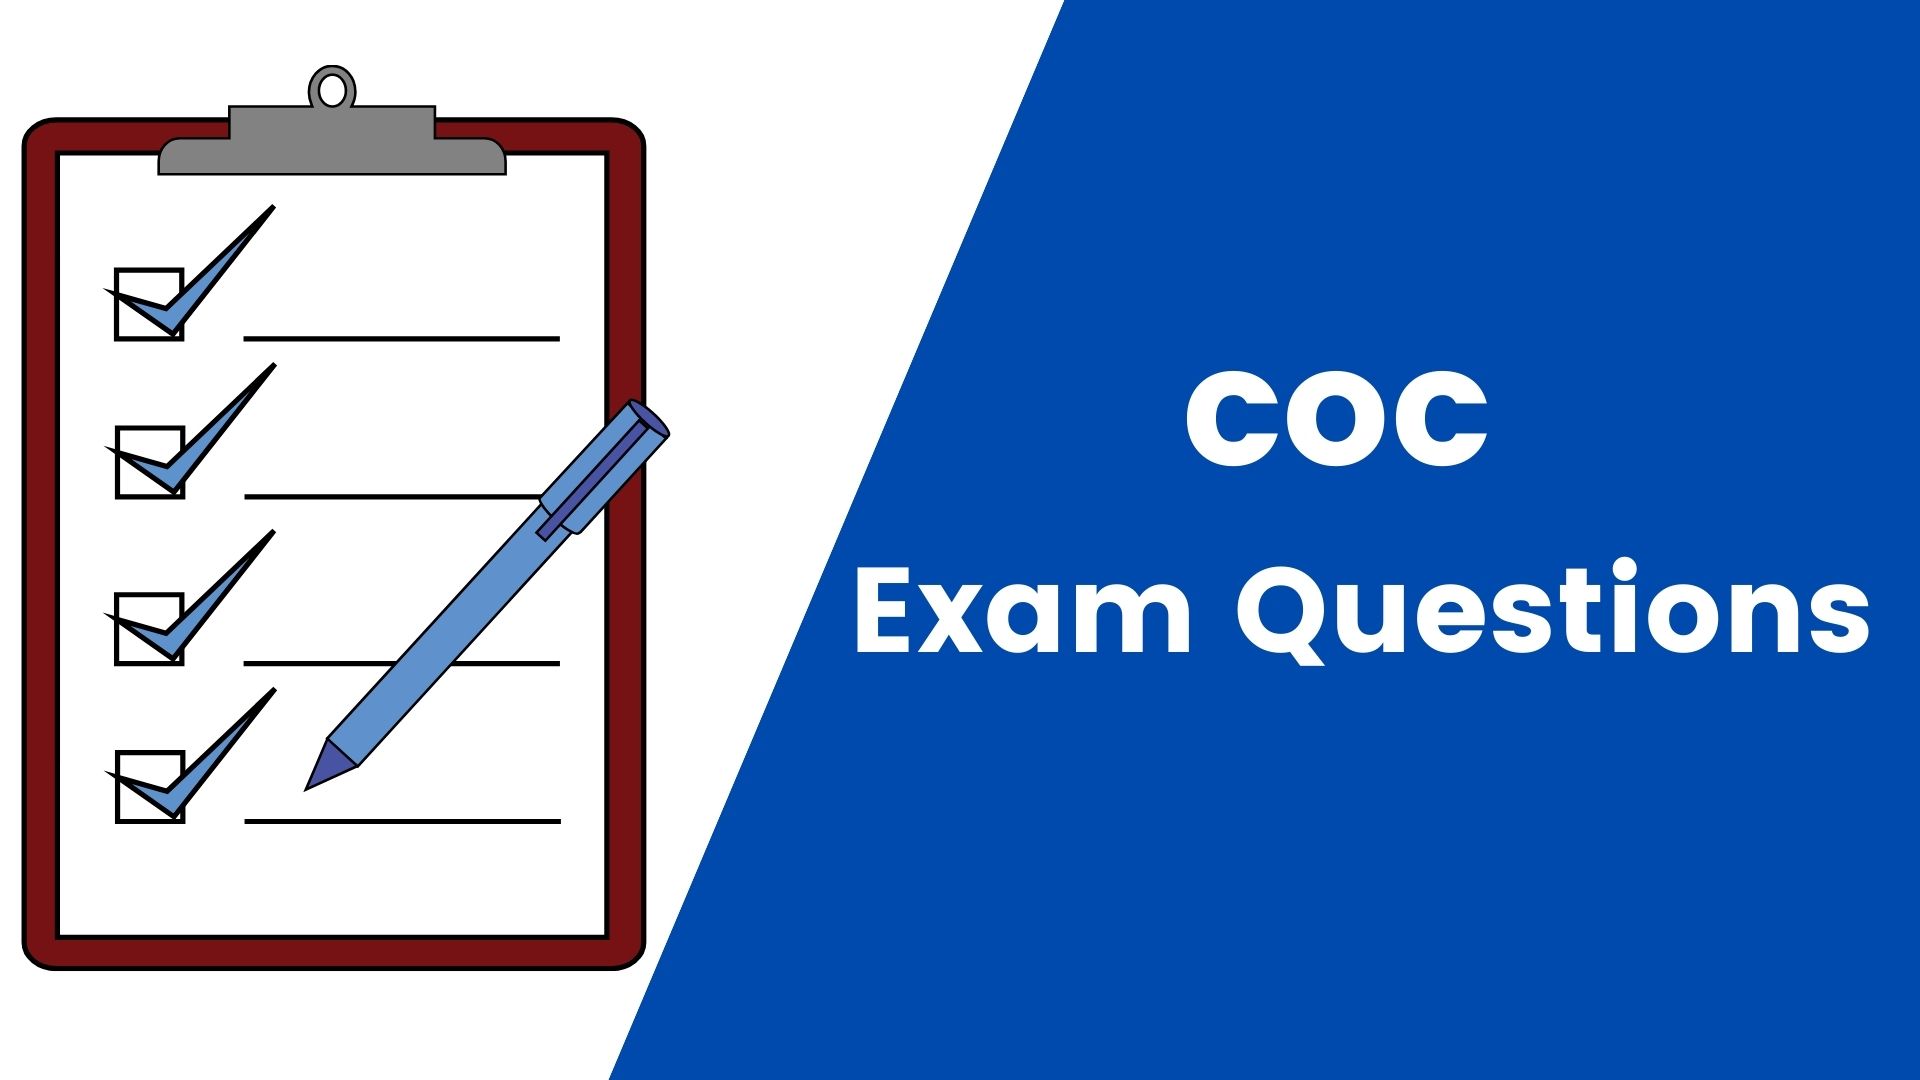 Clinical Officers Council, COC exam papers and questions